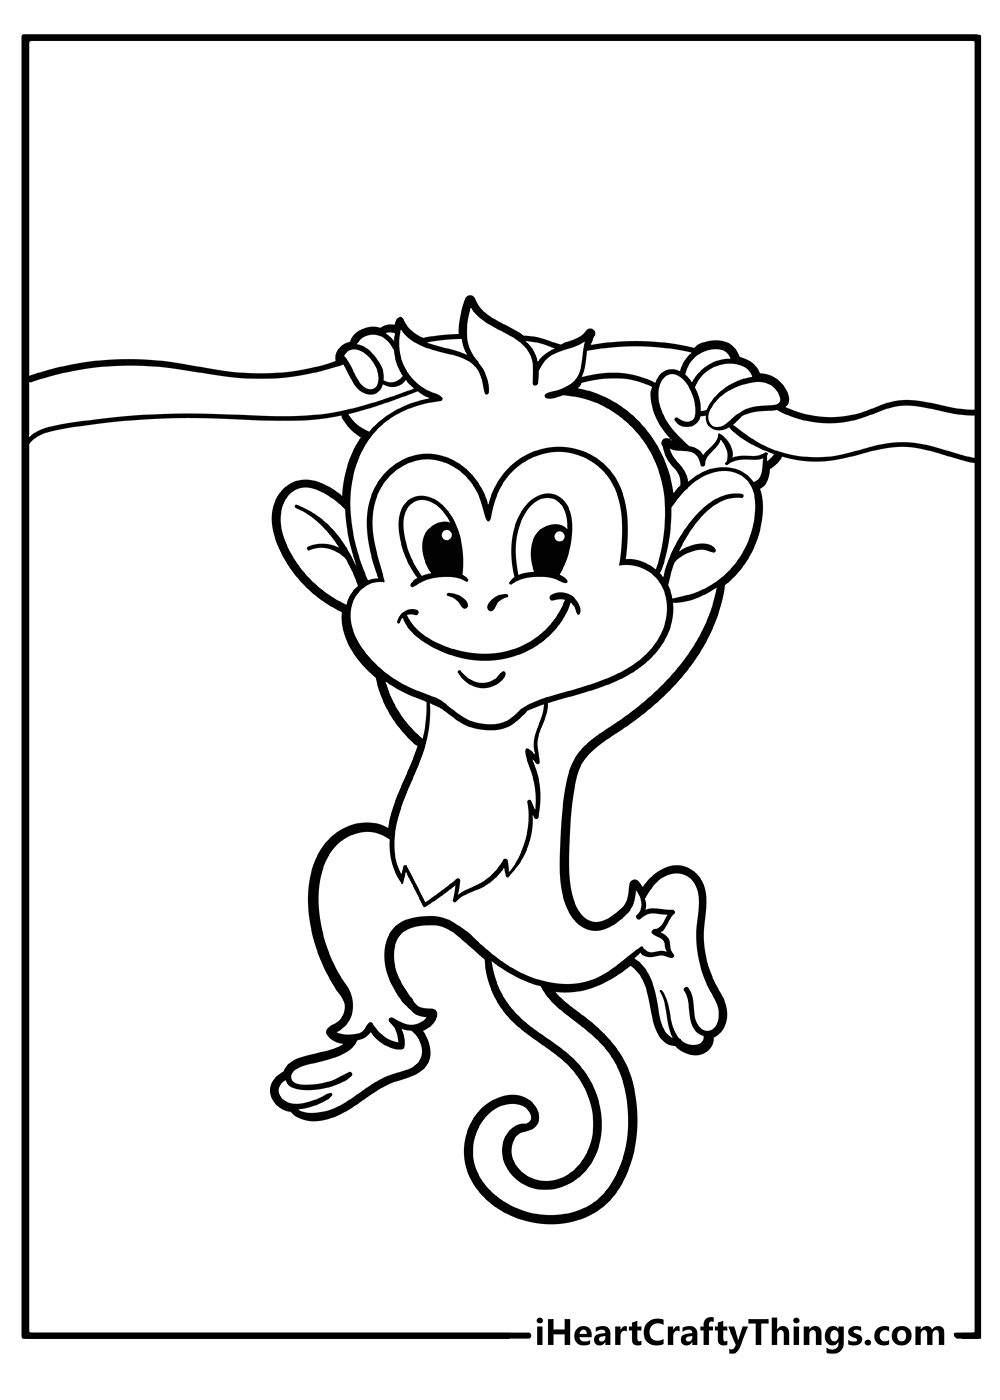 Monkey Coloring Book for adults free download